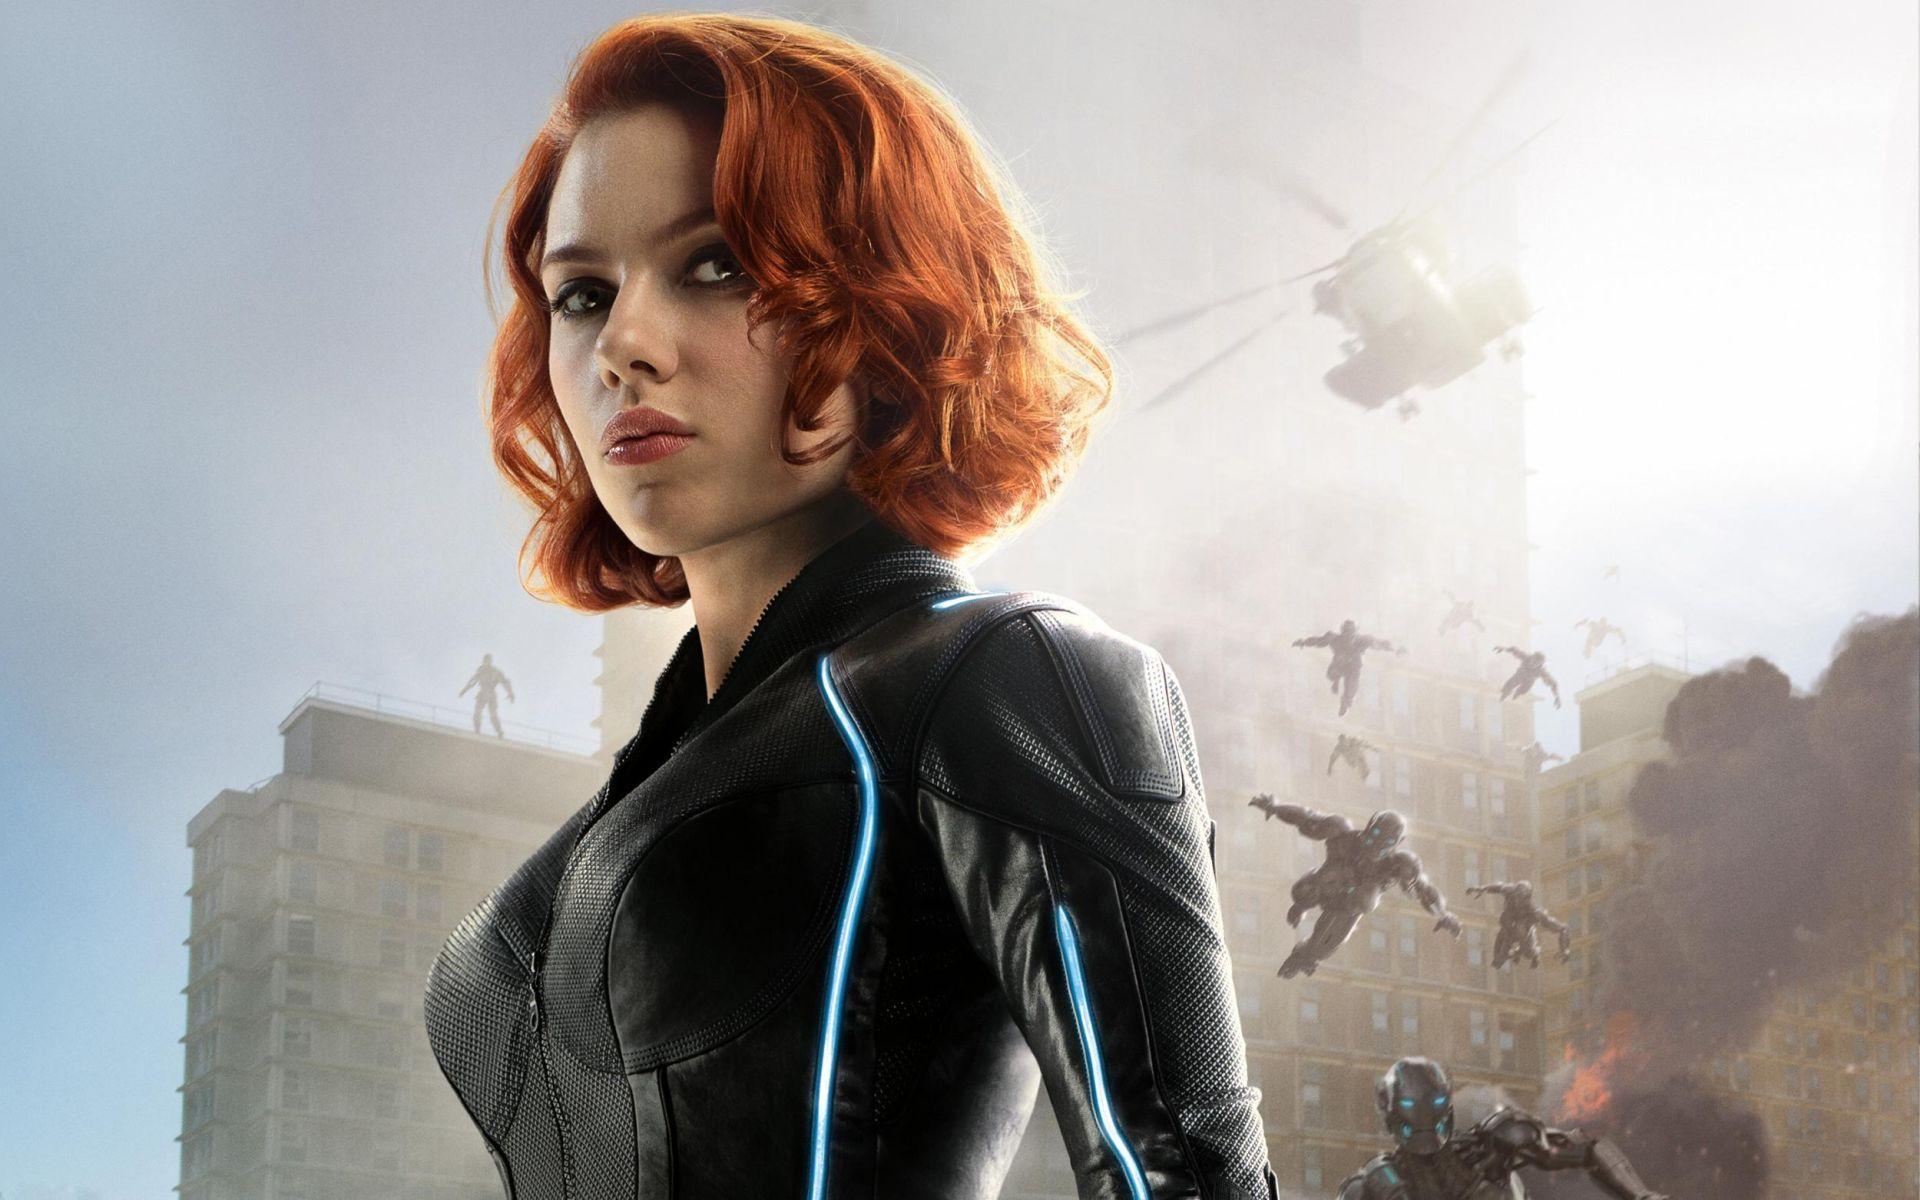 Possible Character Breakdowns For Marvel's BLACK WIDOW Movie